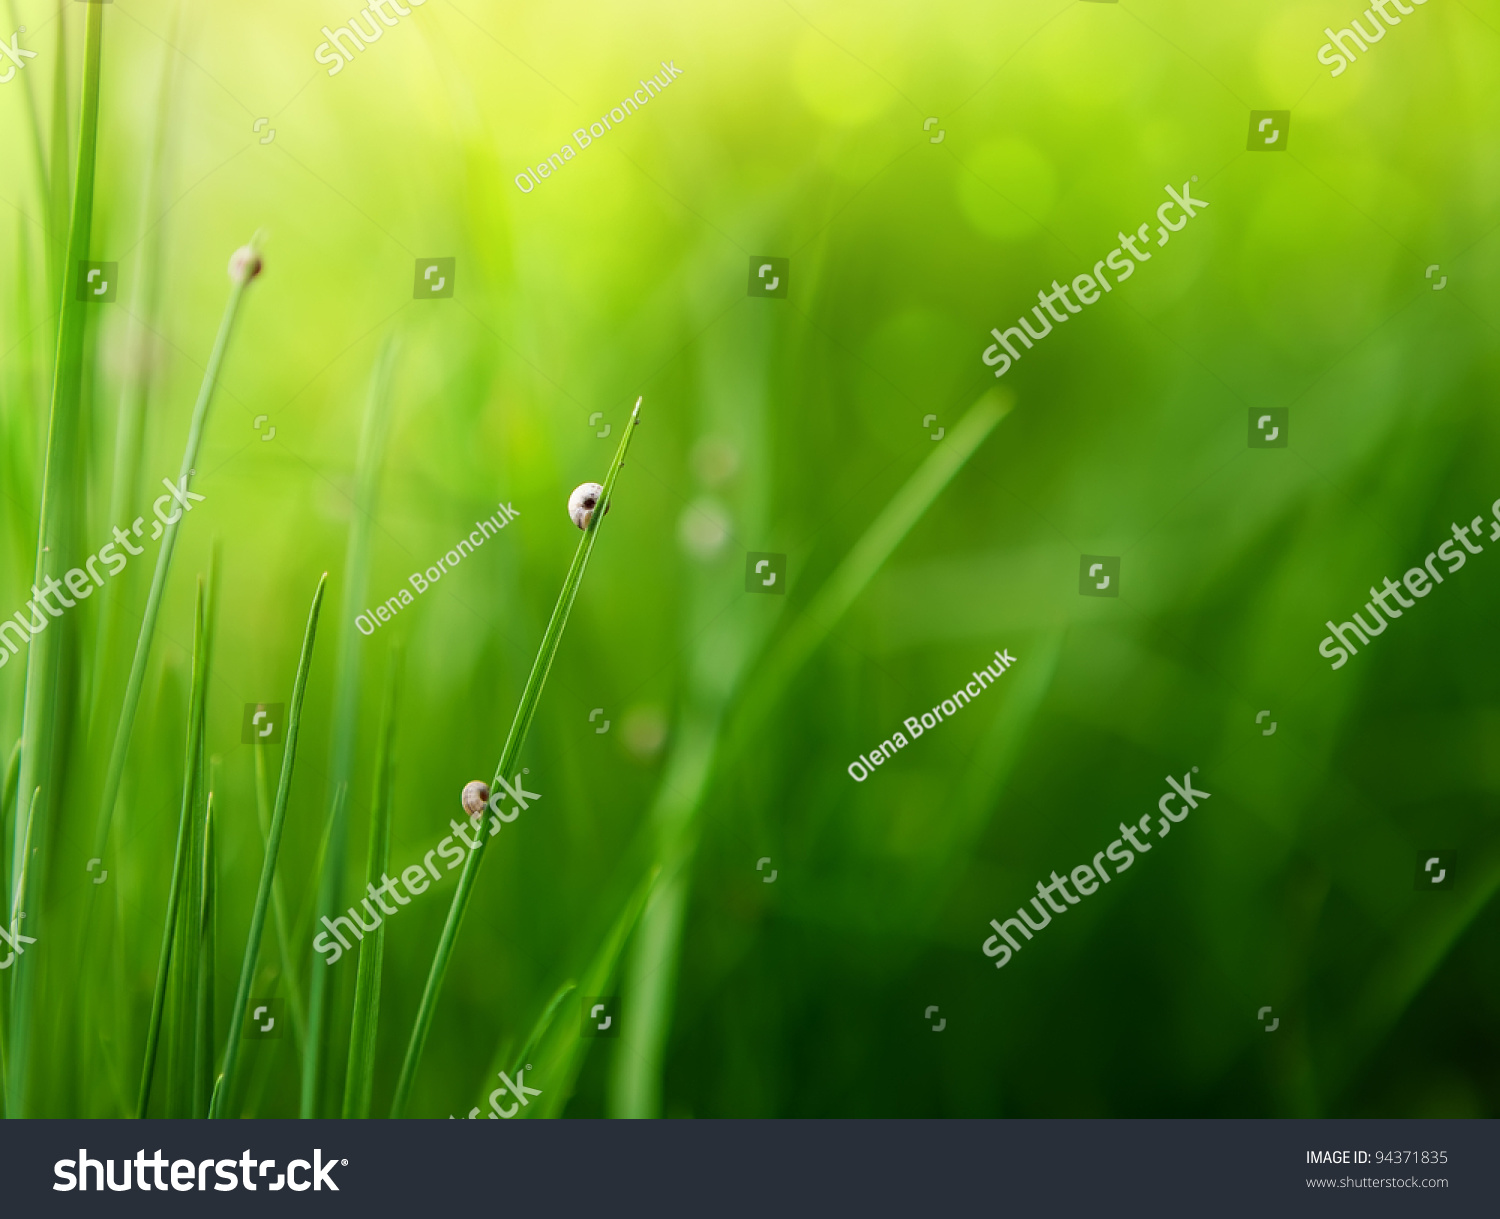 Green Grass Background With Color Bokeh Stock Photo 94371835 : Shutterstock